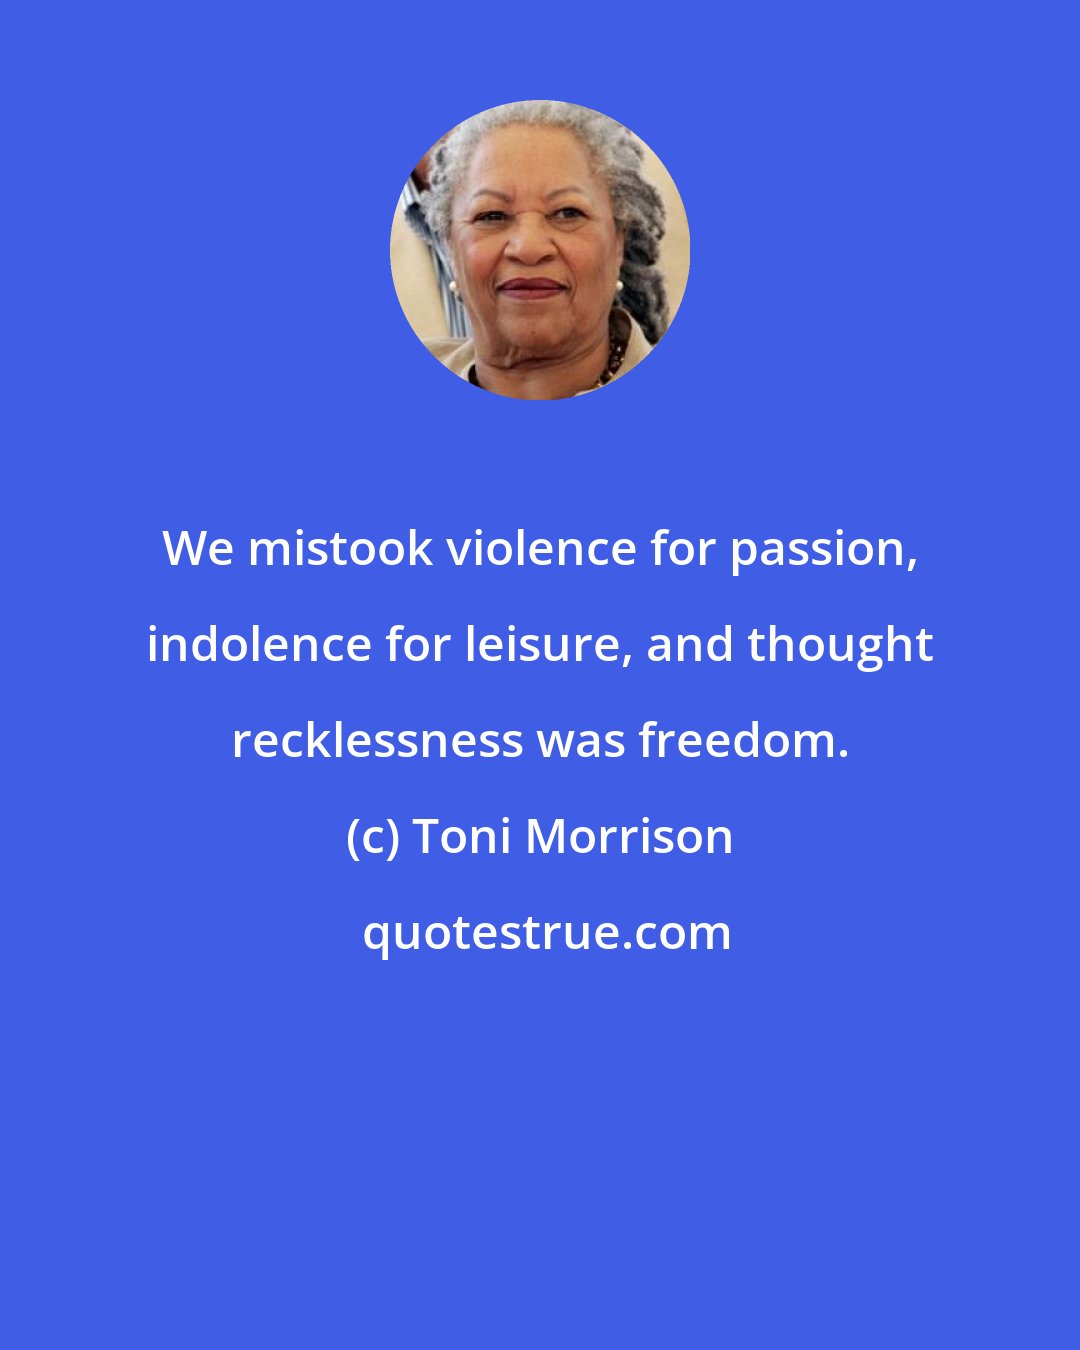 Toni Morrison: We mistook violence for passion, indolence for leisure, and thought recklessness was freedom.